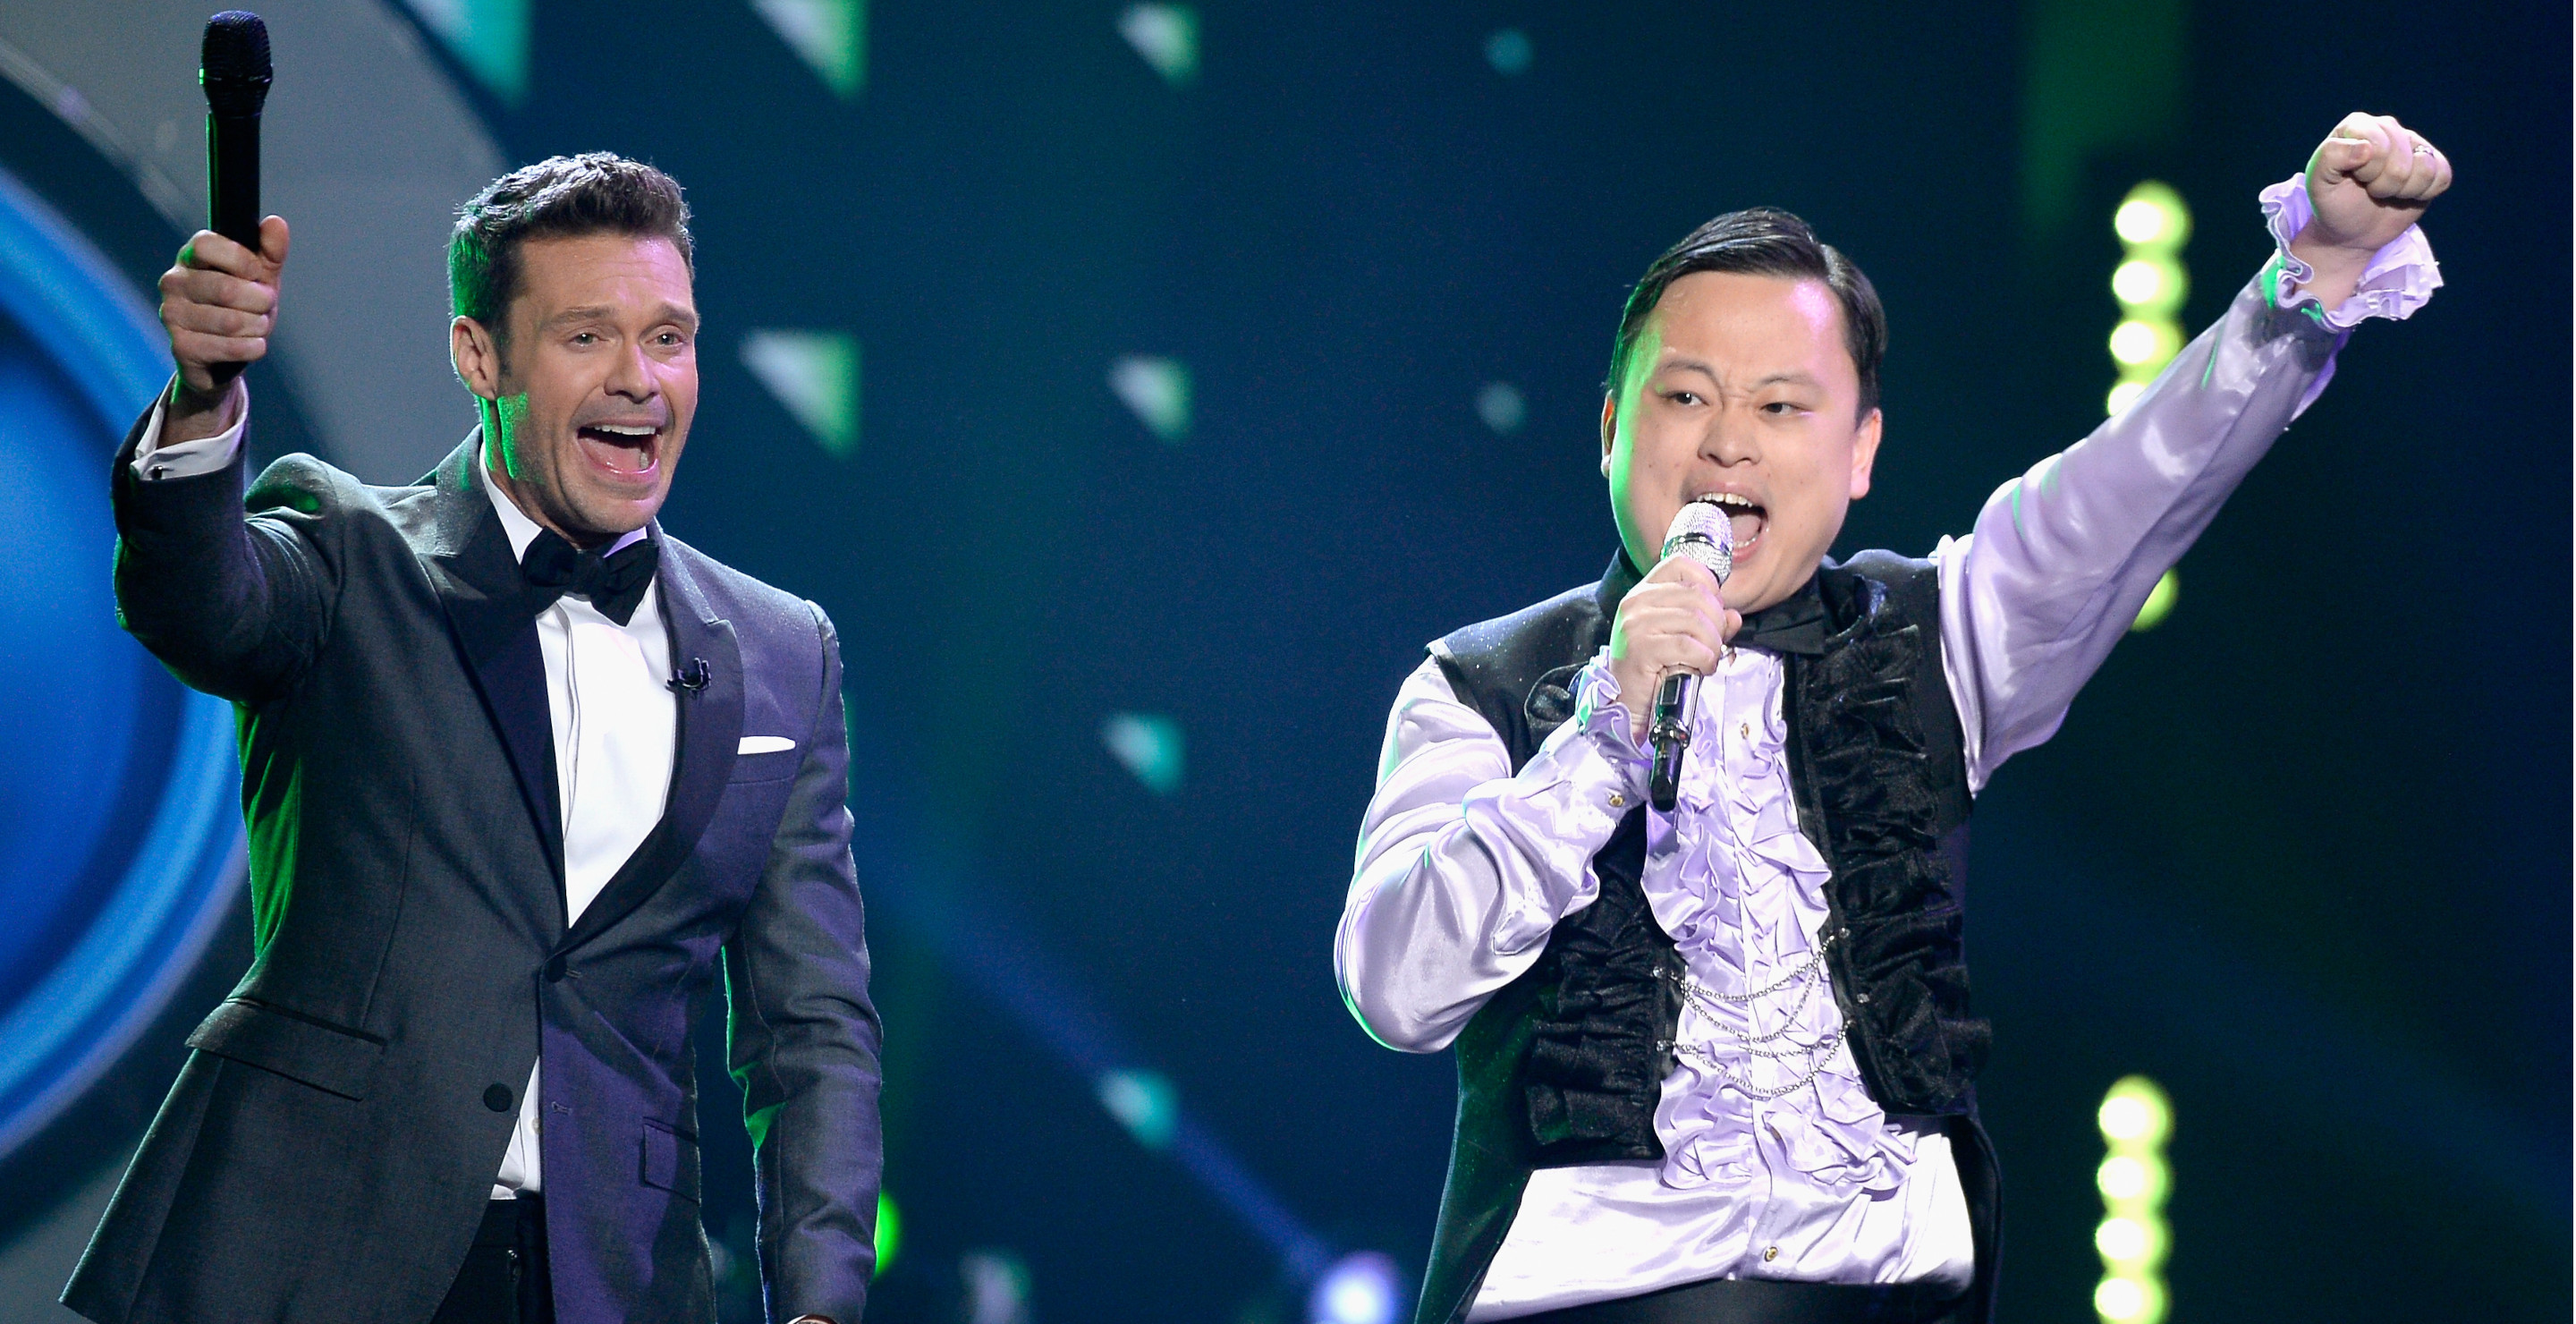 'American Idol' Icon William Hung Has No Regrets Despite Being Ridiculed After Audition